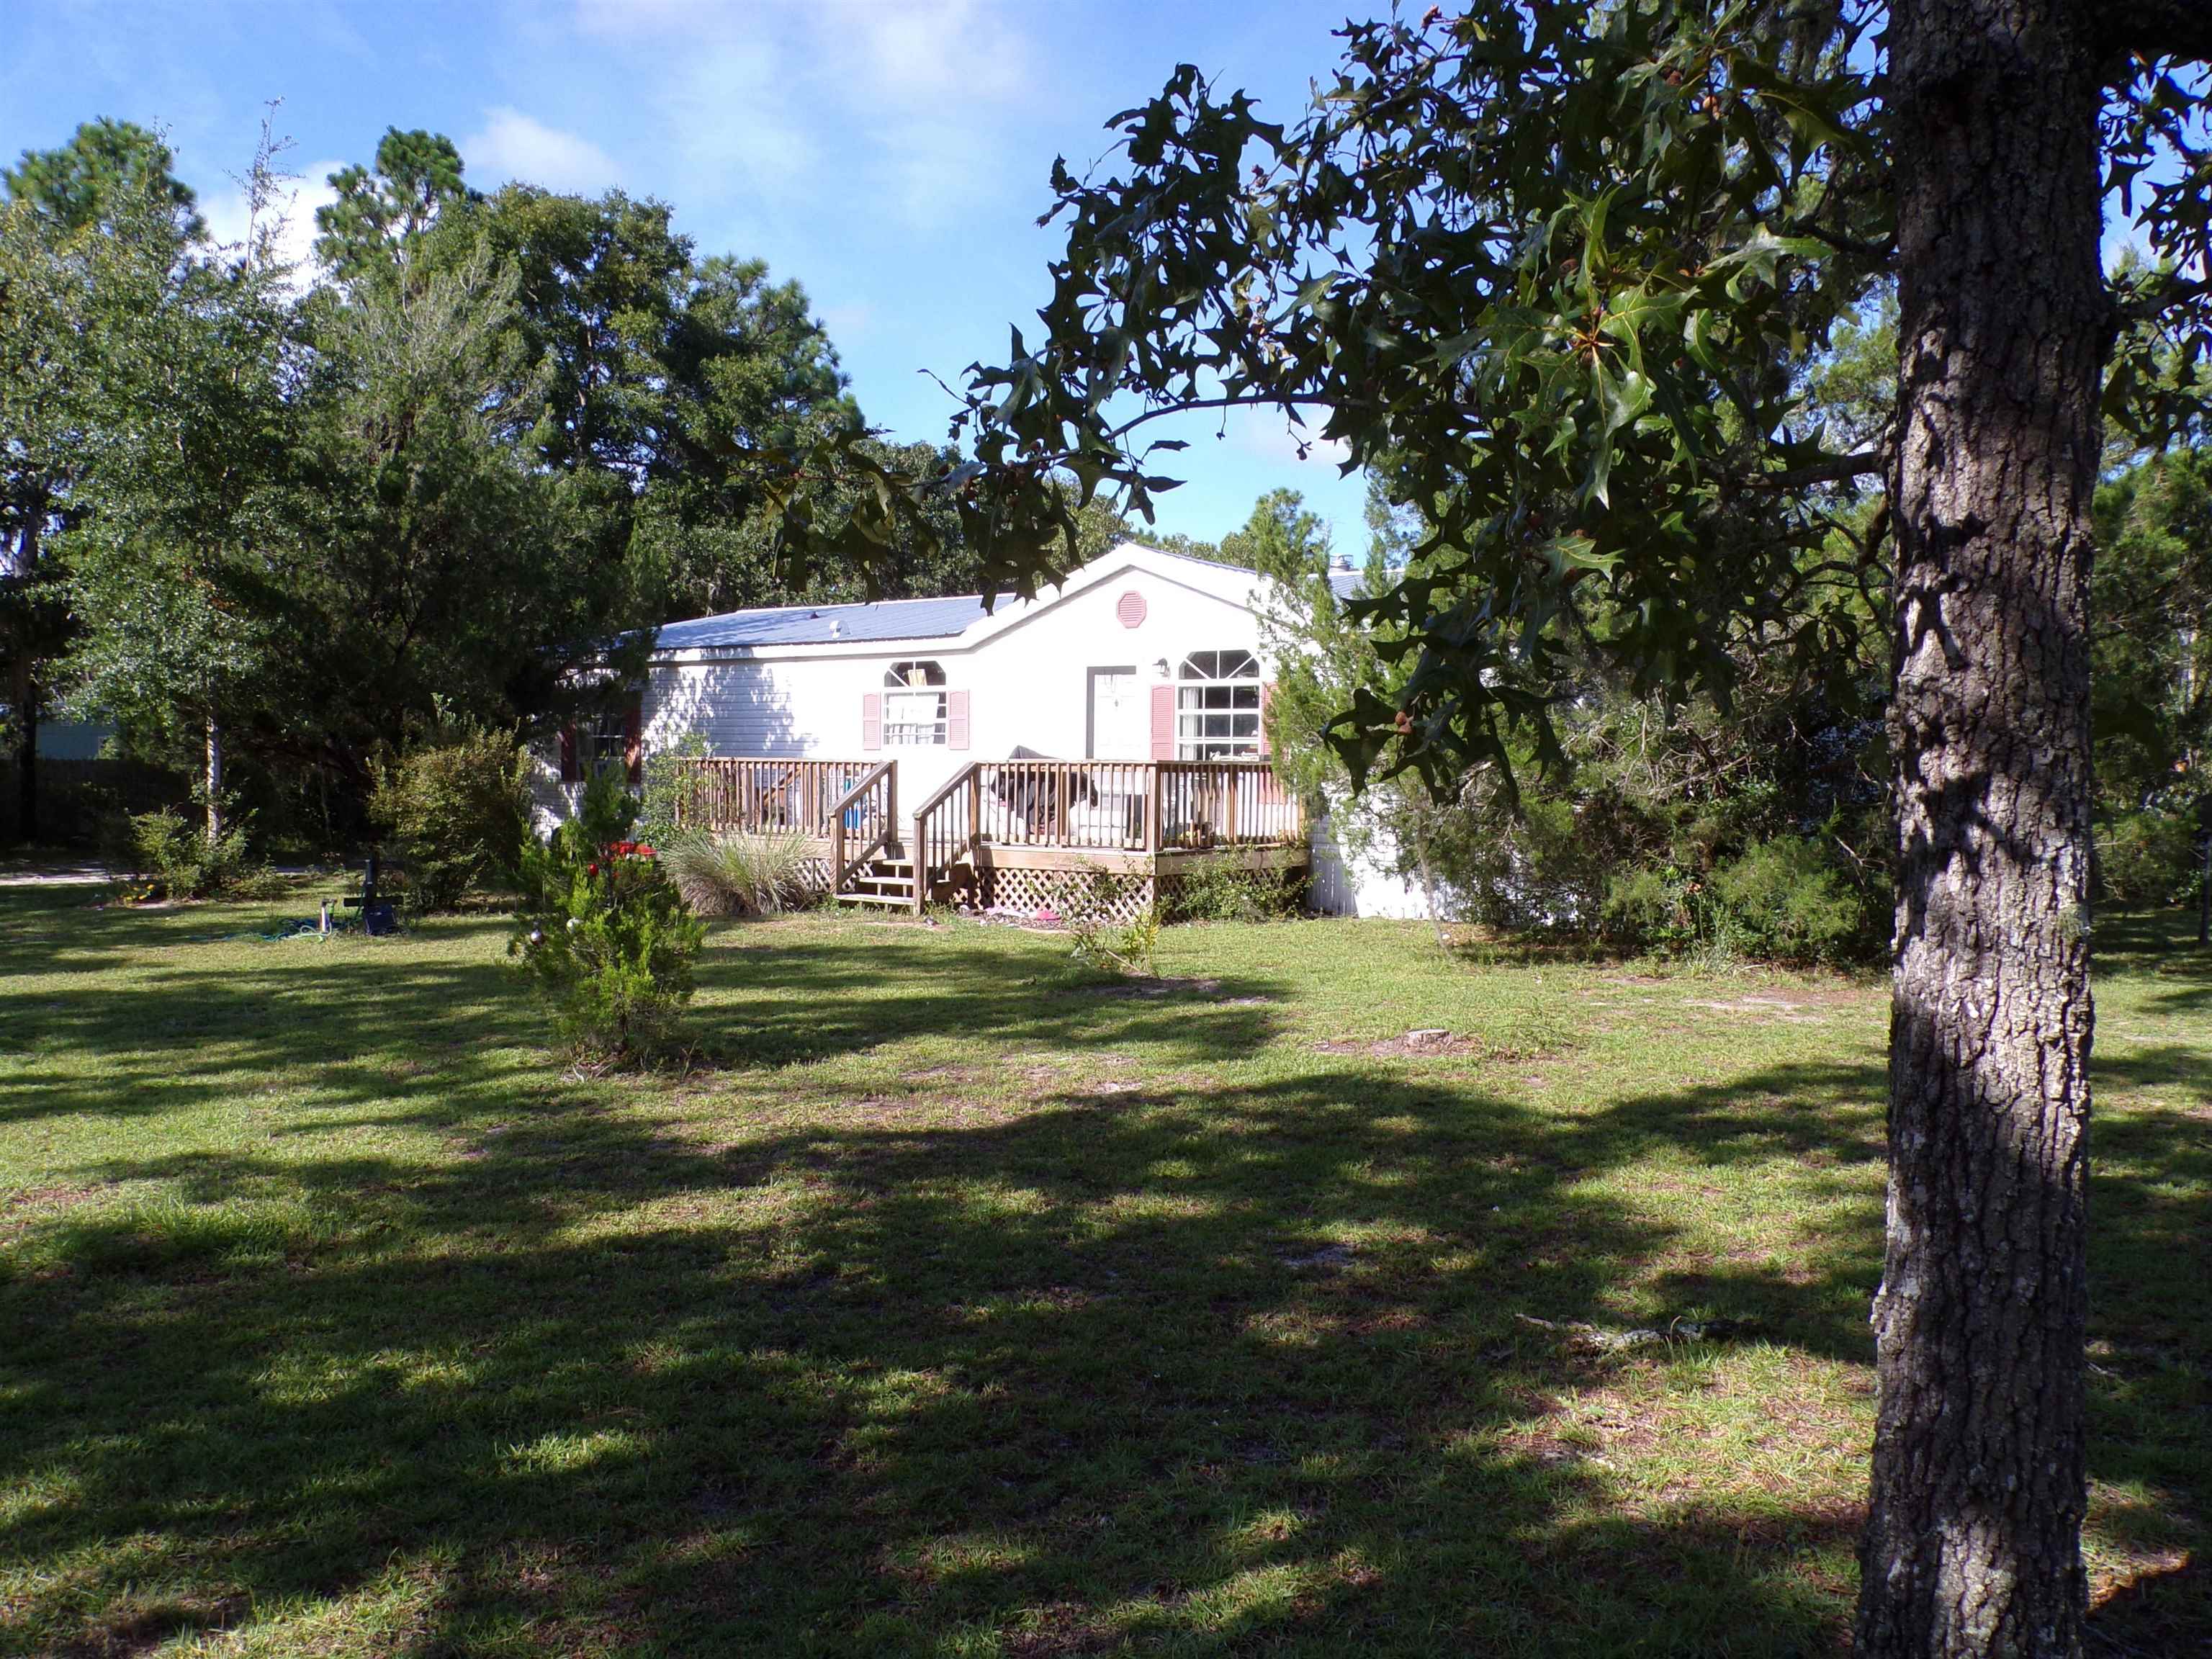 1999 Mobile Home (1998 according to property appraisers site) in Panacea, FL.  Big and spacious, 3br, 2 bath.  Roof replaced in 2019.  Home does not have central heat and air but seller is allowing up to $10,000 in repairs to include but not limited to replacing or repairing the unit prior to closing.  Mobile home is on 1 acre of land, partially fenced, peaceful & quiet neighborhood.  Approximately 30 miles to Tallahassee & 12 miles to the beach! Home uses a septic tank and utilizes county water.